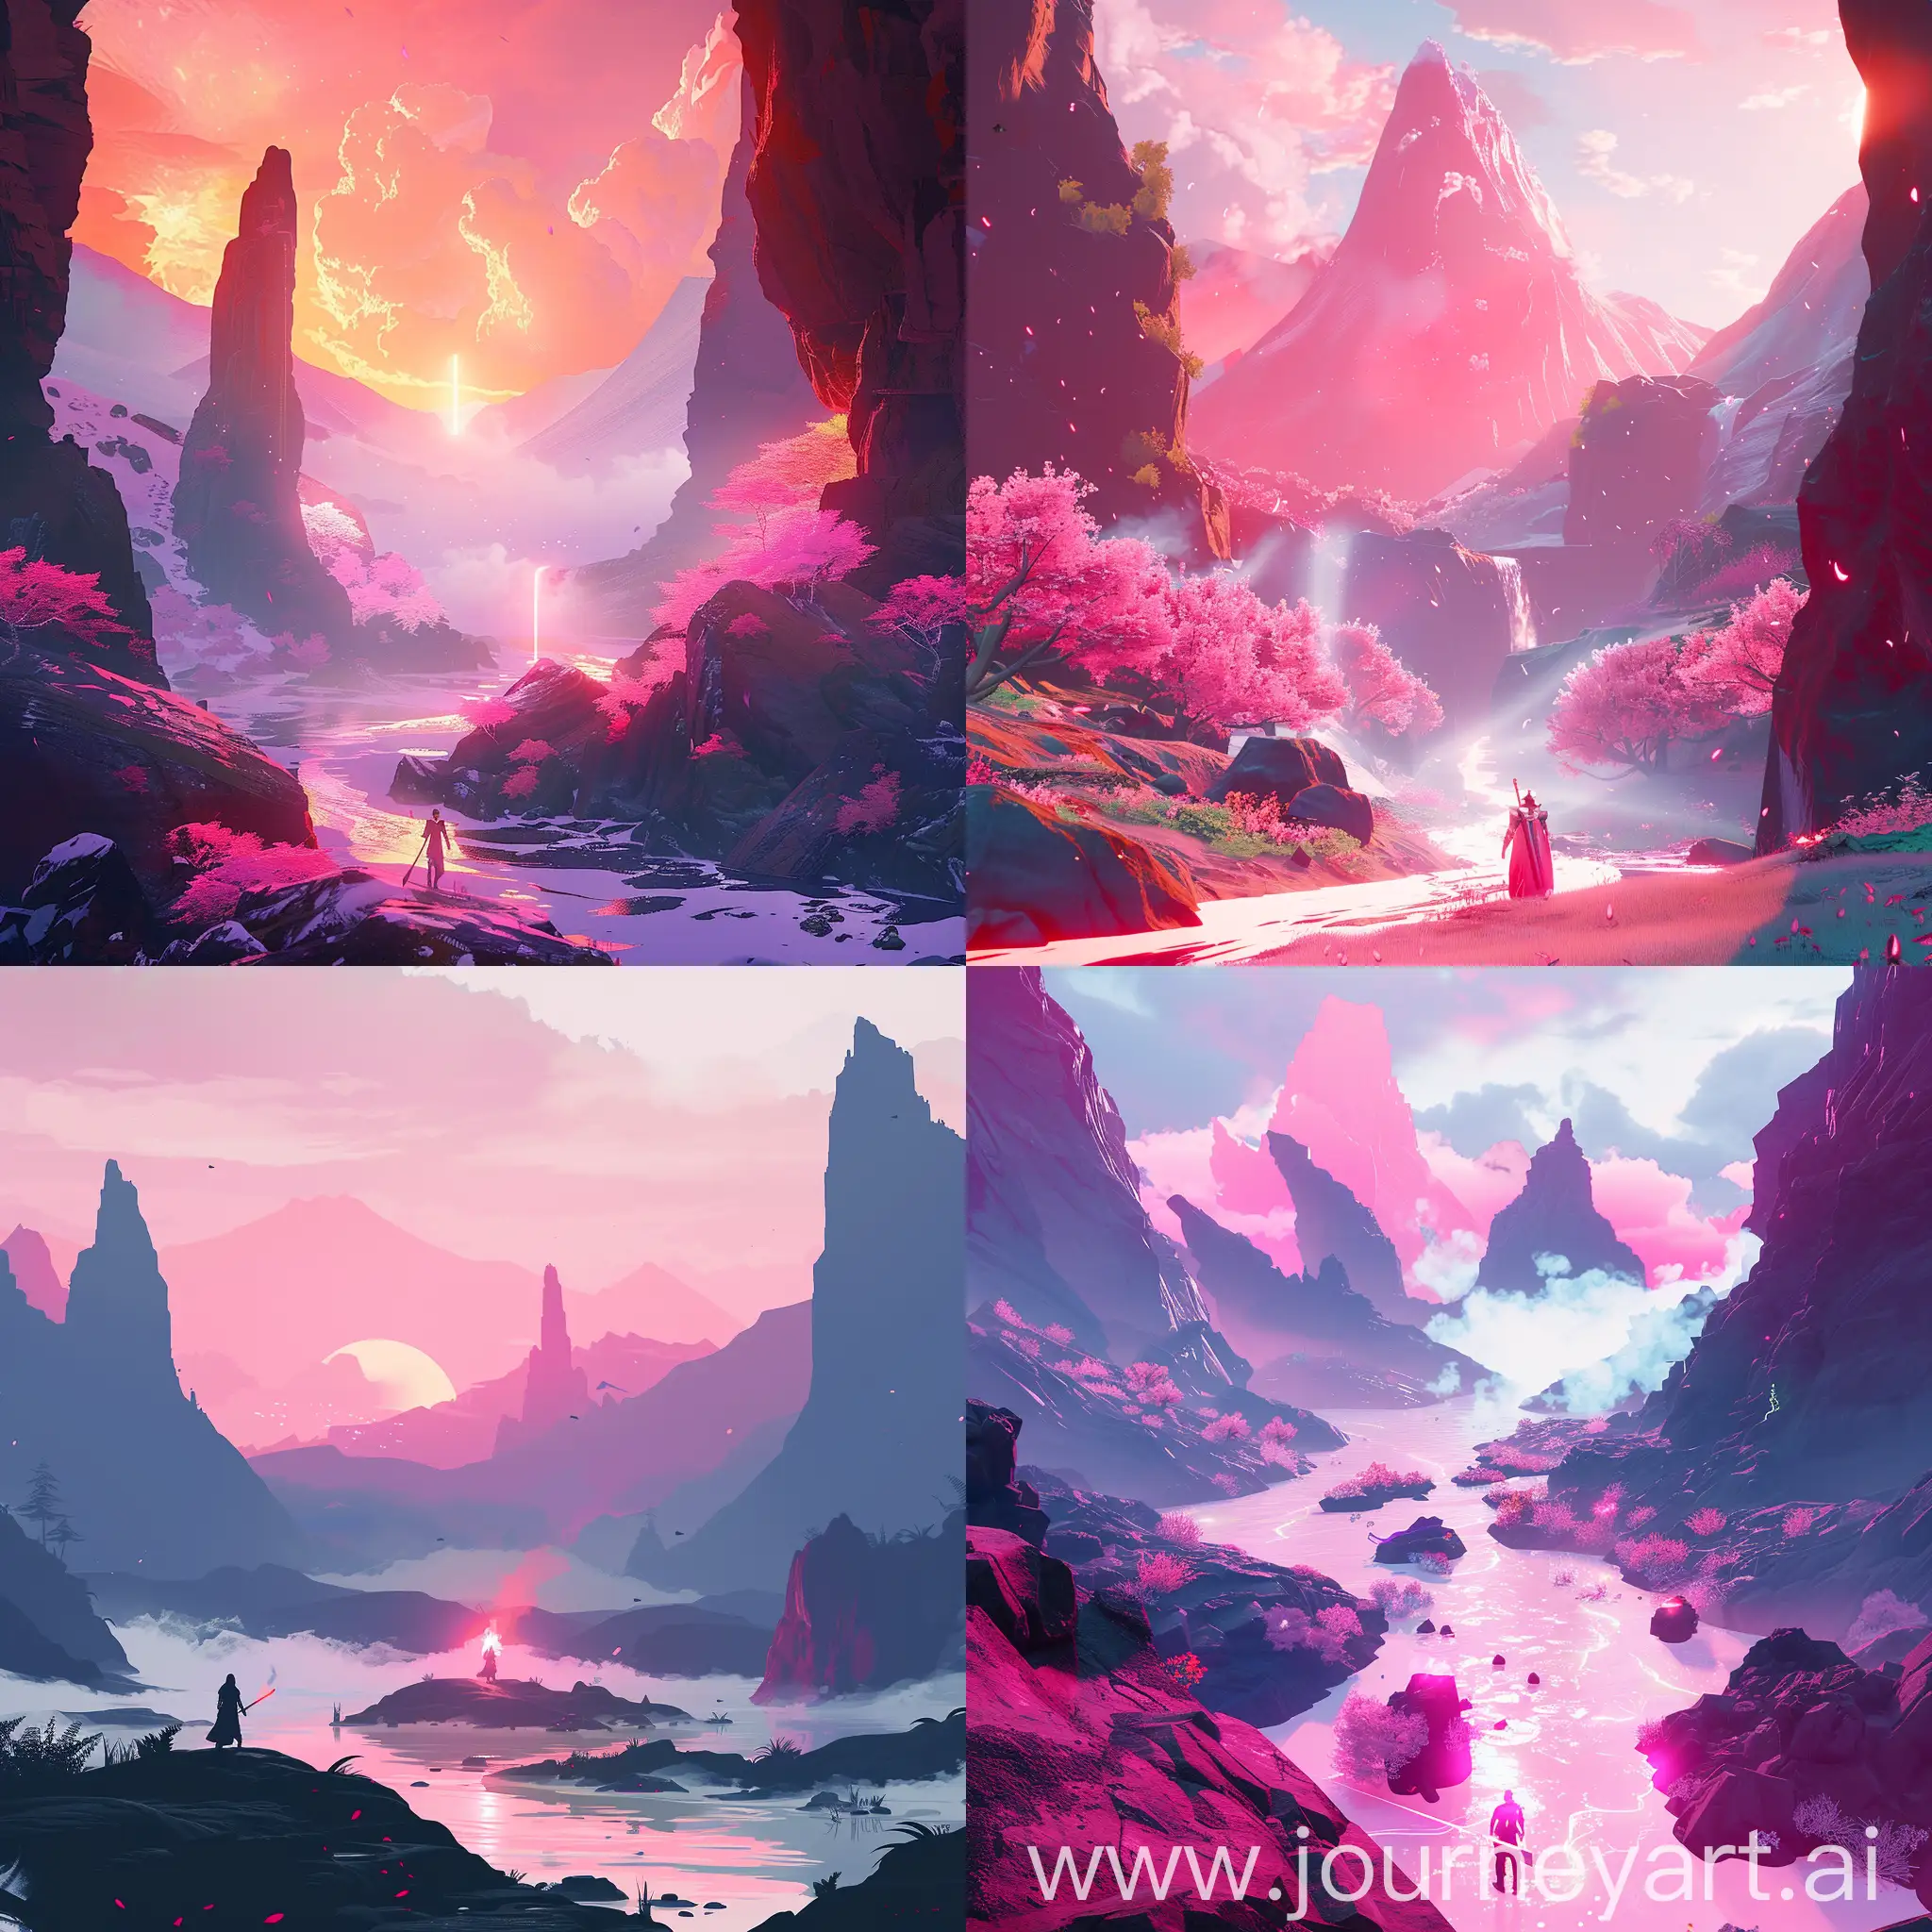 epic game visuals inspired by final fantasy. the scenario is mostly nature, with epic mountains and the pink light of the sunset. the main character is a fire mage. bright colors. magical place. civilization. 